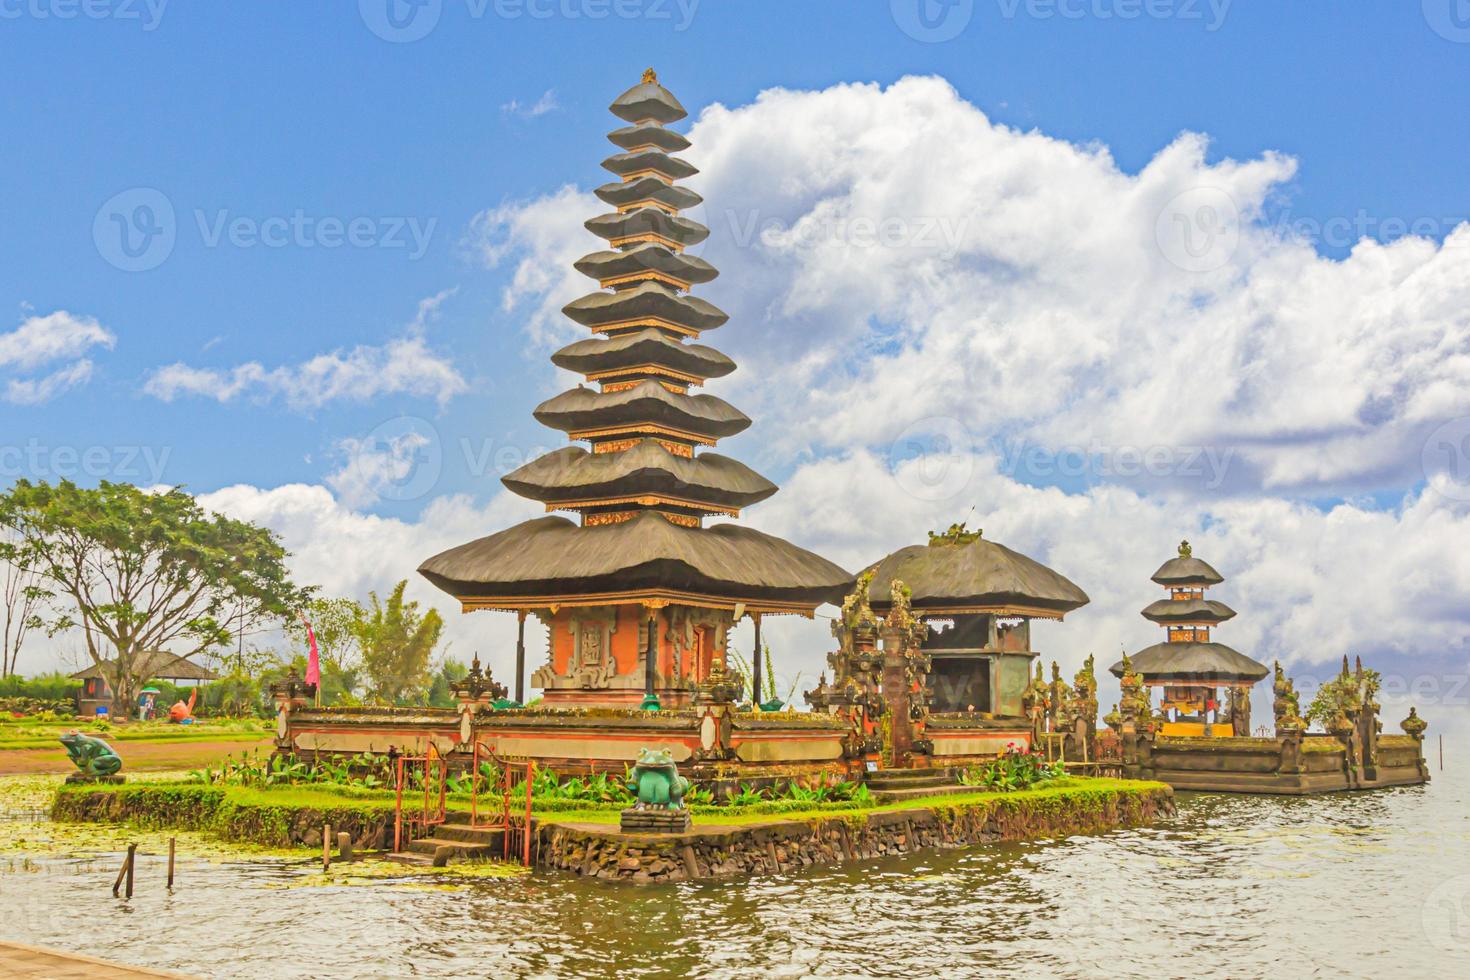 Picture of the spectacular roof structures of a typical Balinese temple complex photo